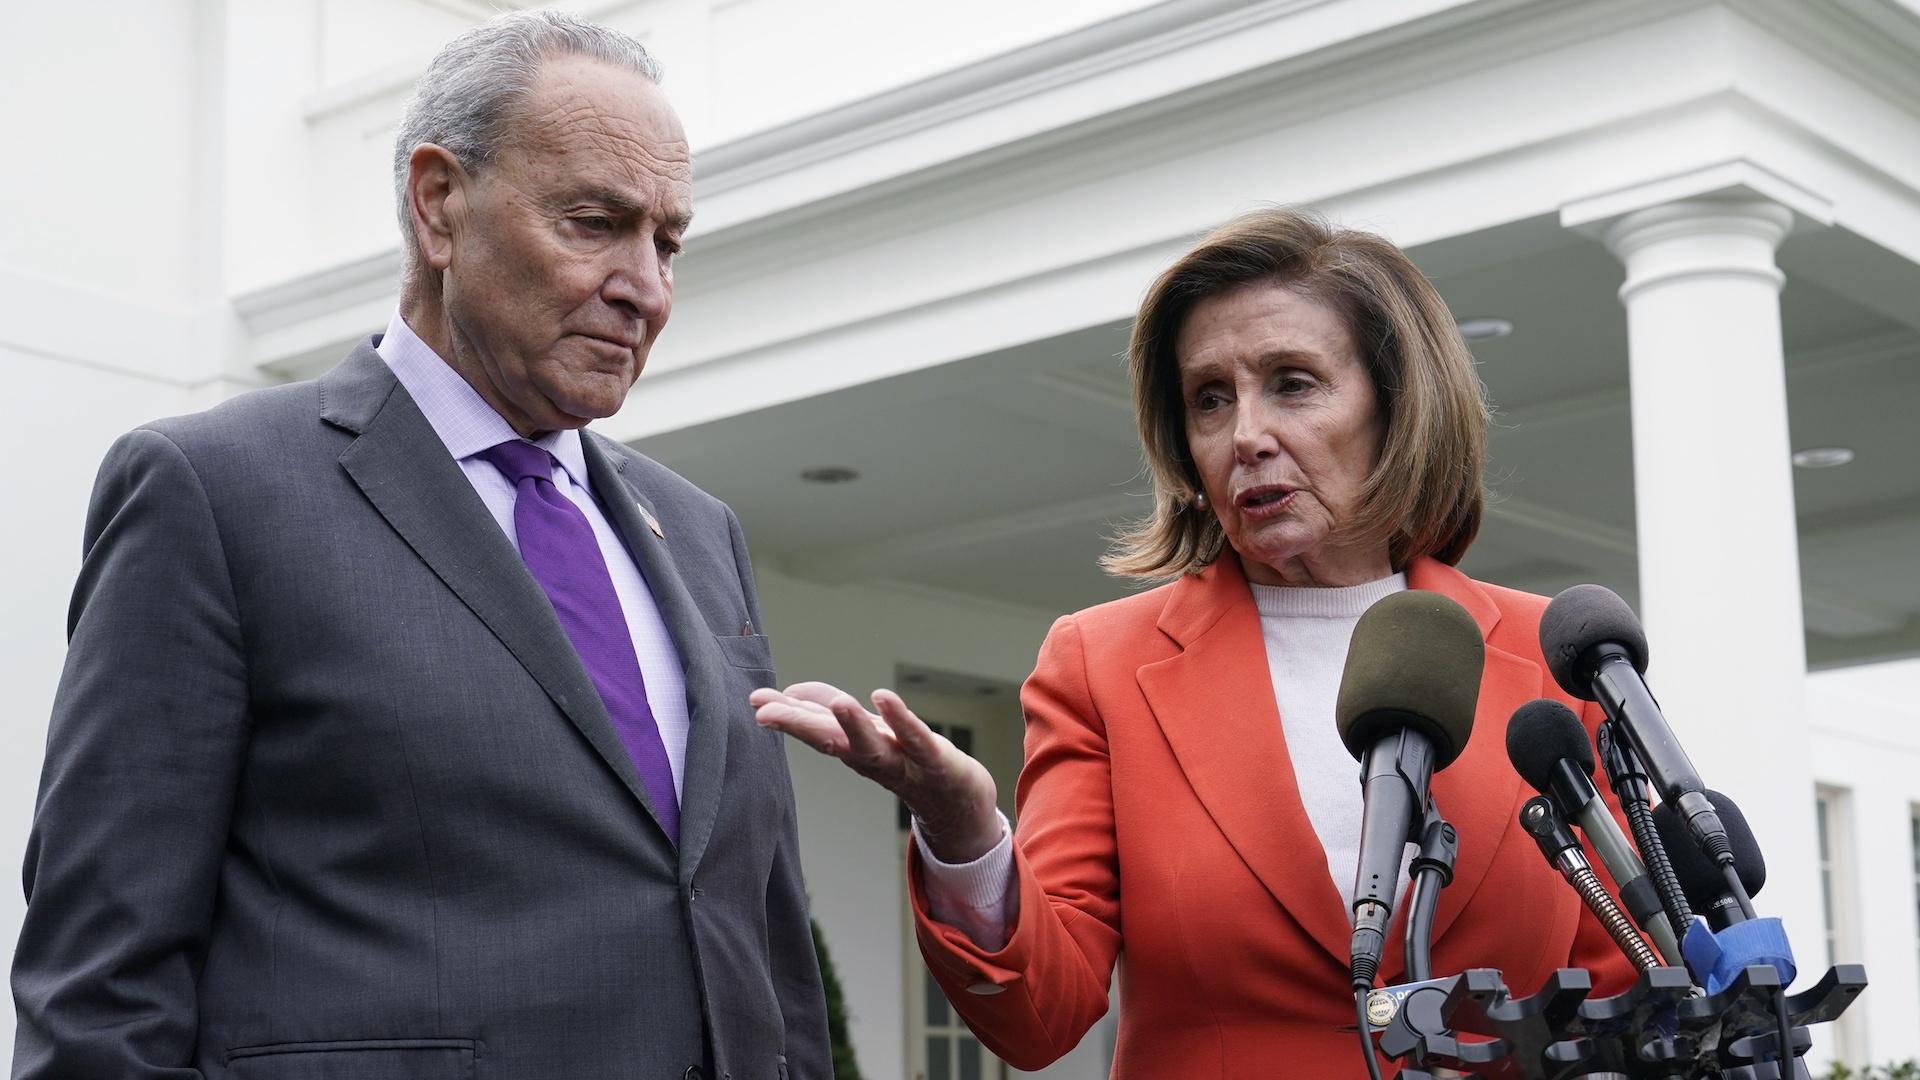 Senate Majority Leader Chuck Schumer of N.Y., right, listens as House Speaker Nancy Pelosi of Calif., left, speaks to reporters at the White House in Washington, Nov. 29, 2022, about their meeting with President Joe Biden. (AP Photo/Susan Walsh)